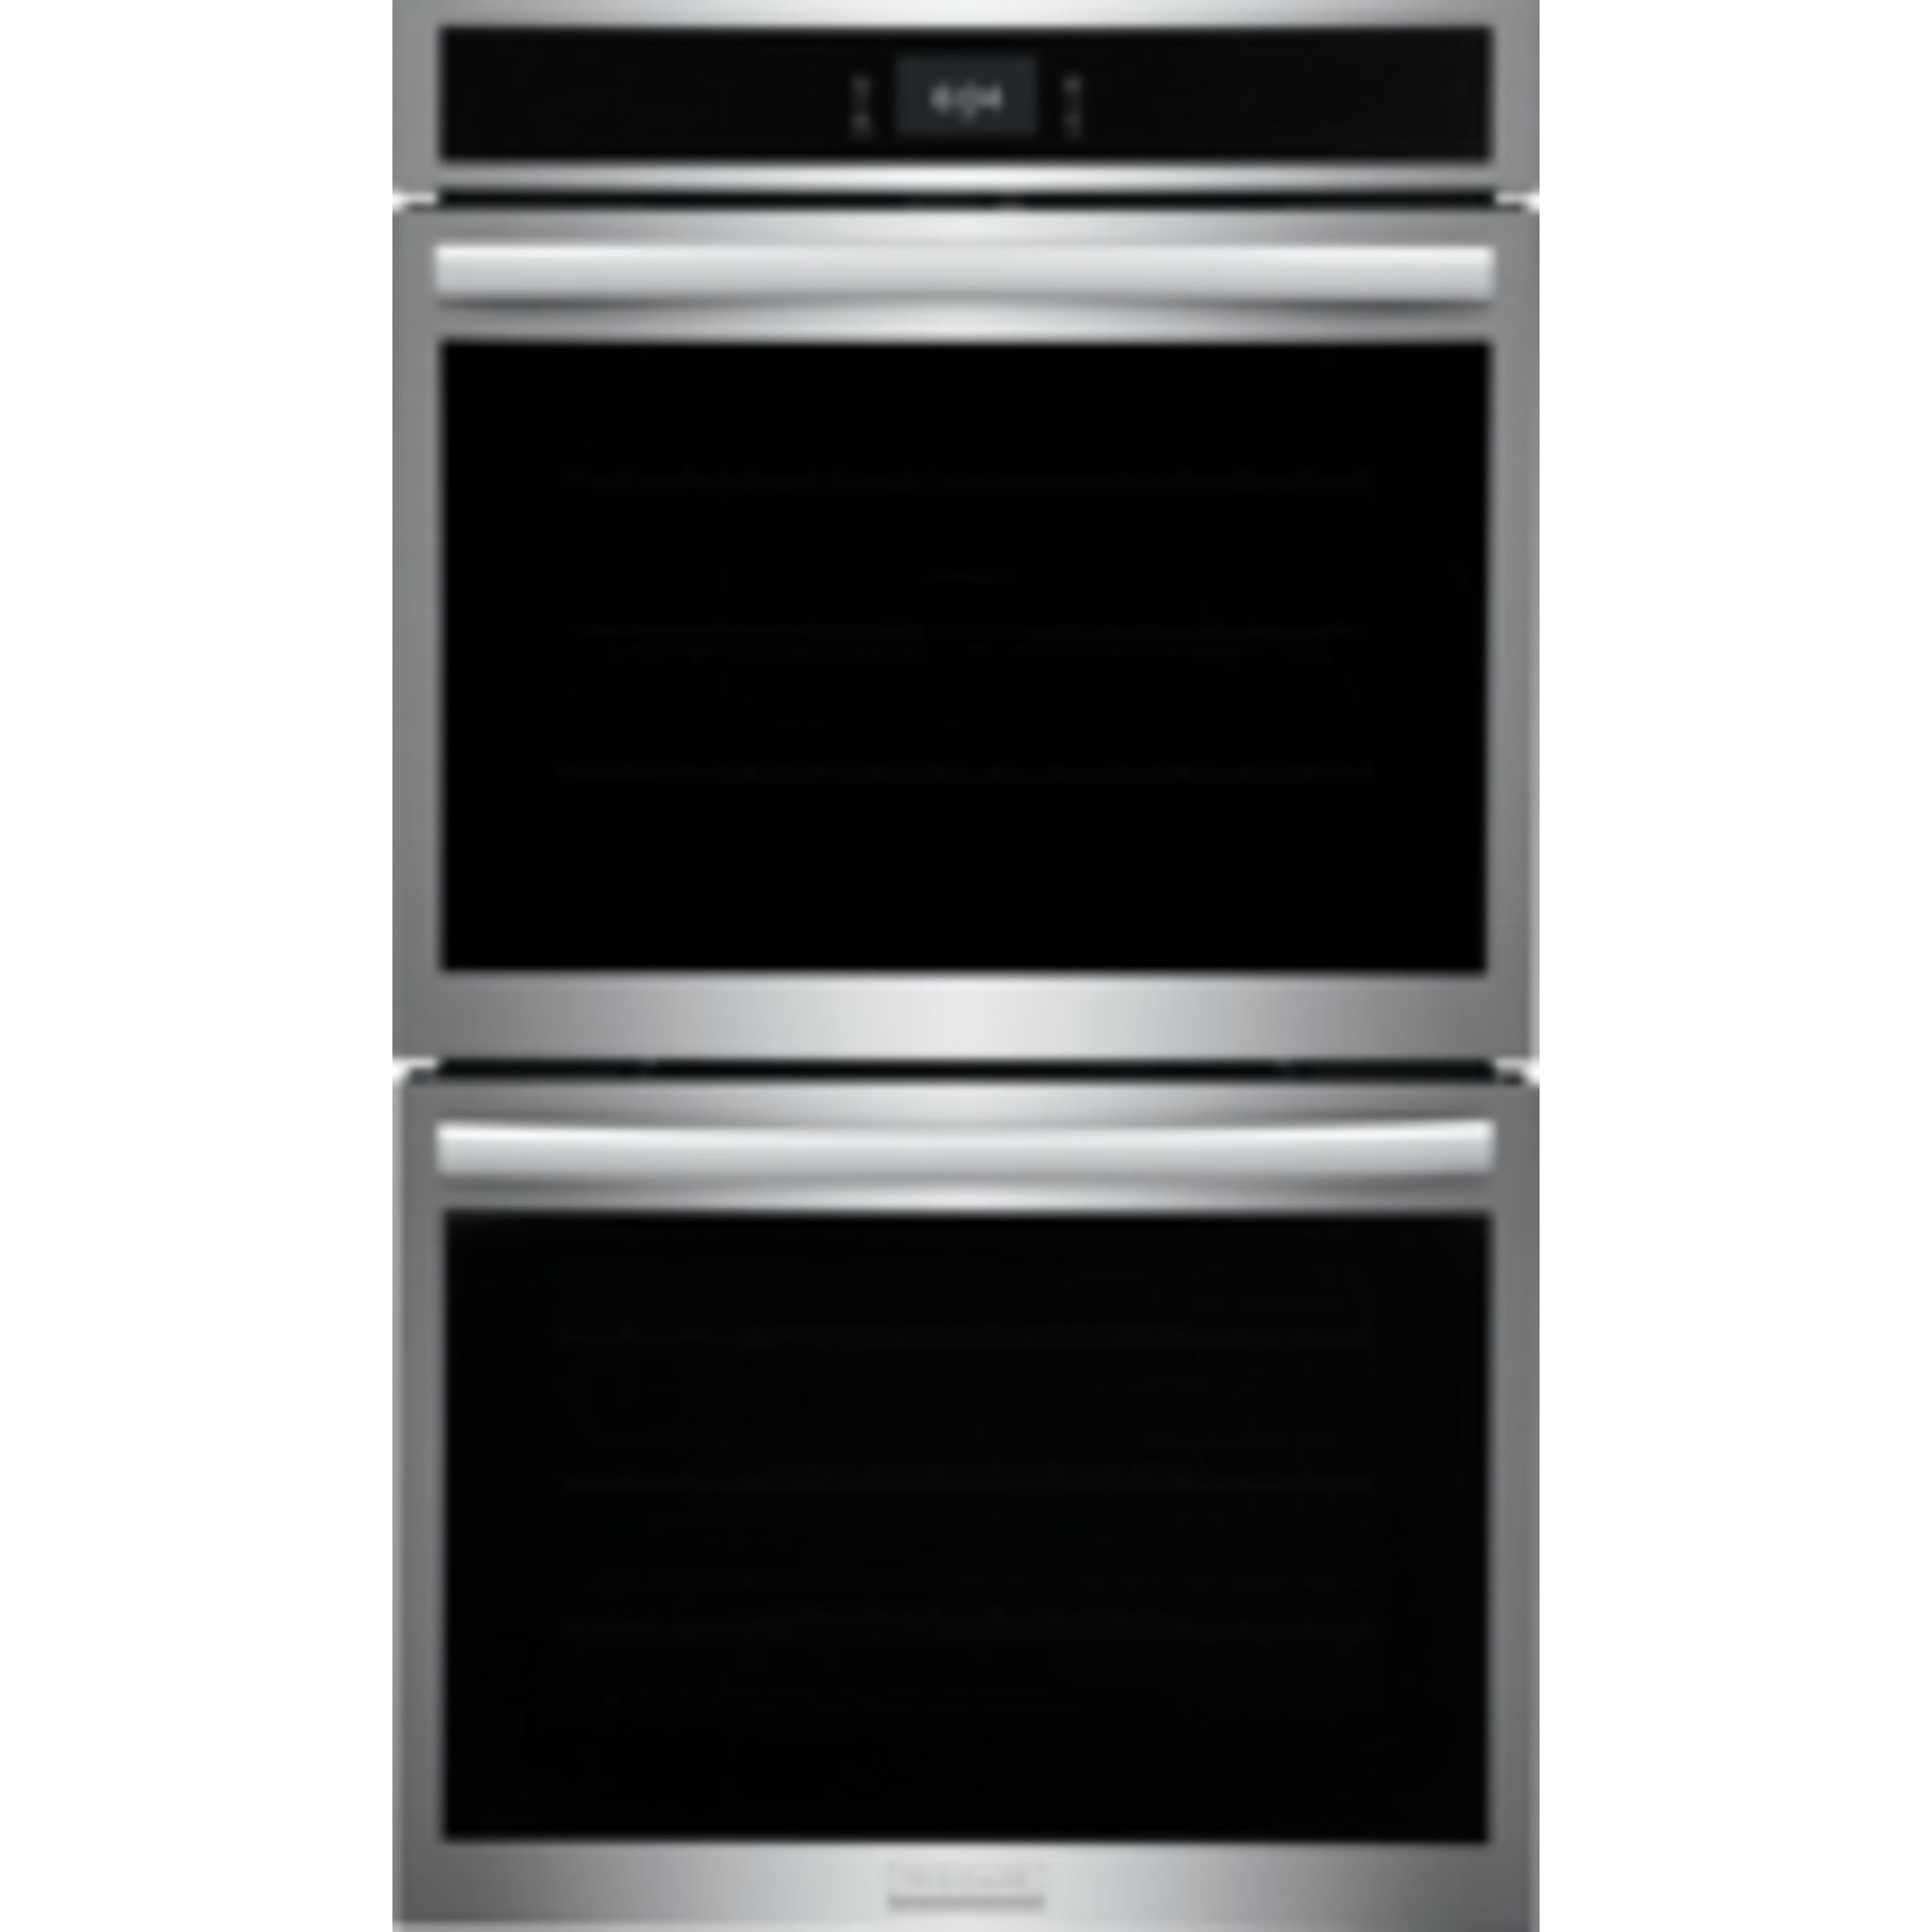 Frigidaire Gallery, Frigidaire Gallery 30" True Convection Wall Oven (GCWD3067AF) - Stainless Steel